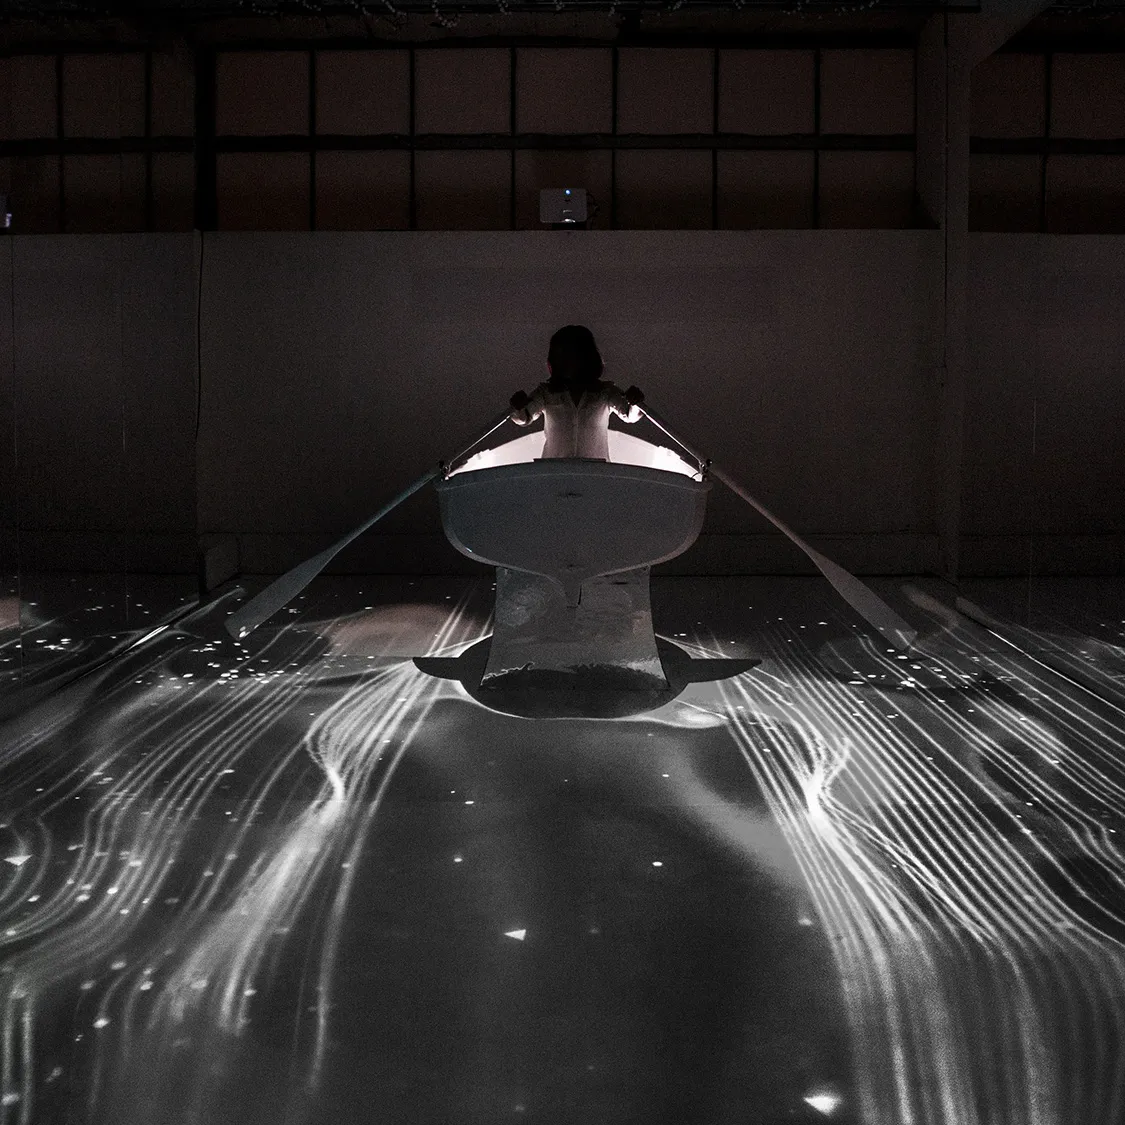 image of woman in rowboat interacting with digital stars and water projections all around her